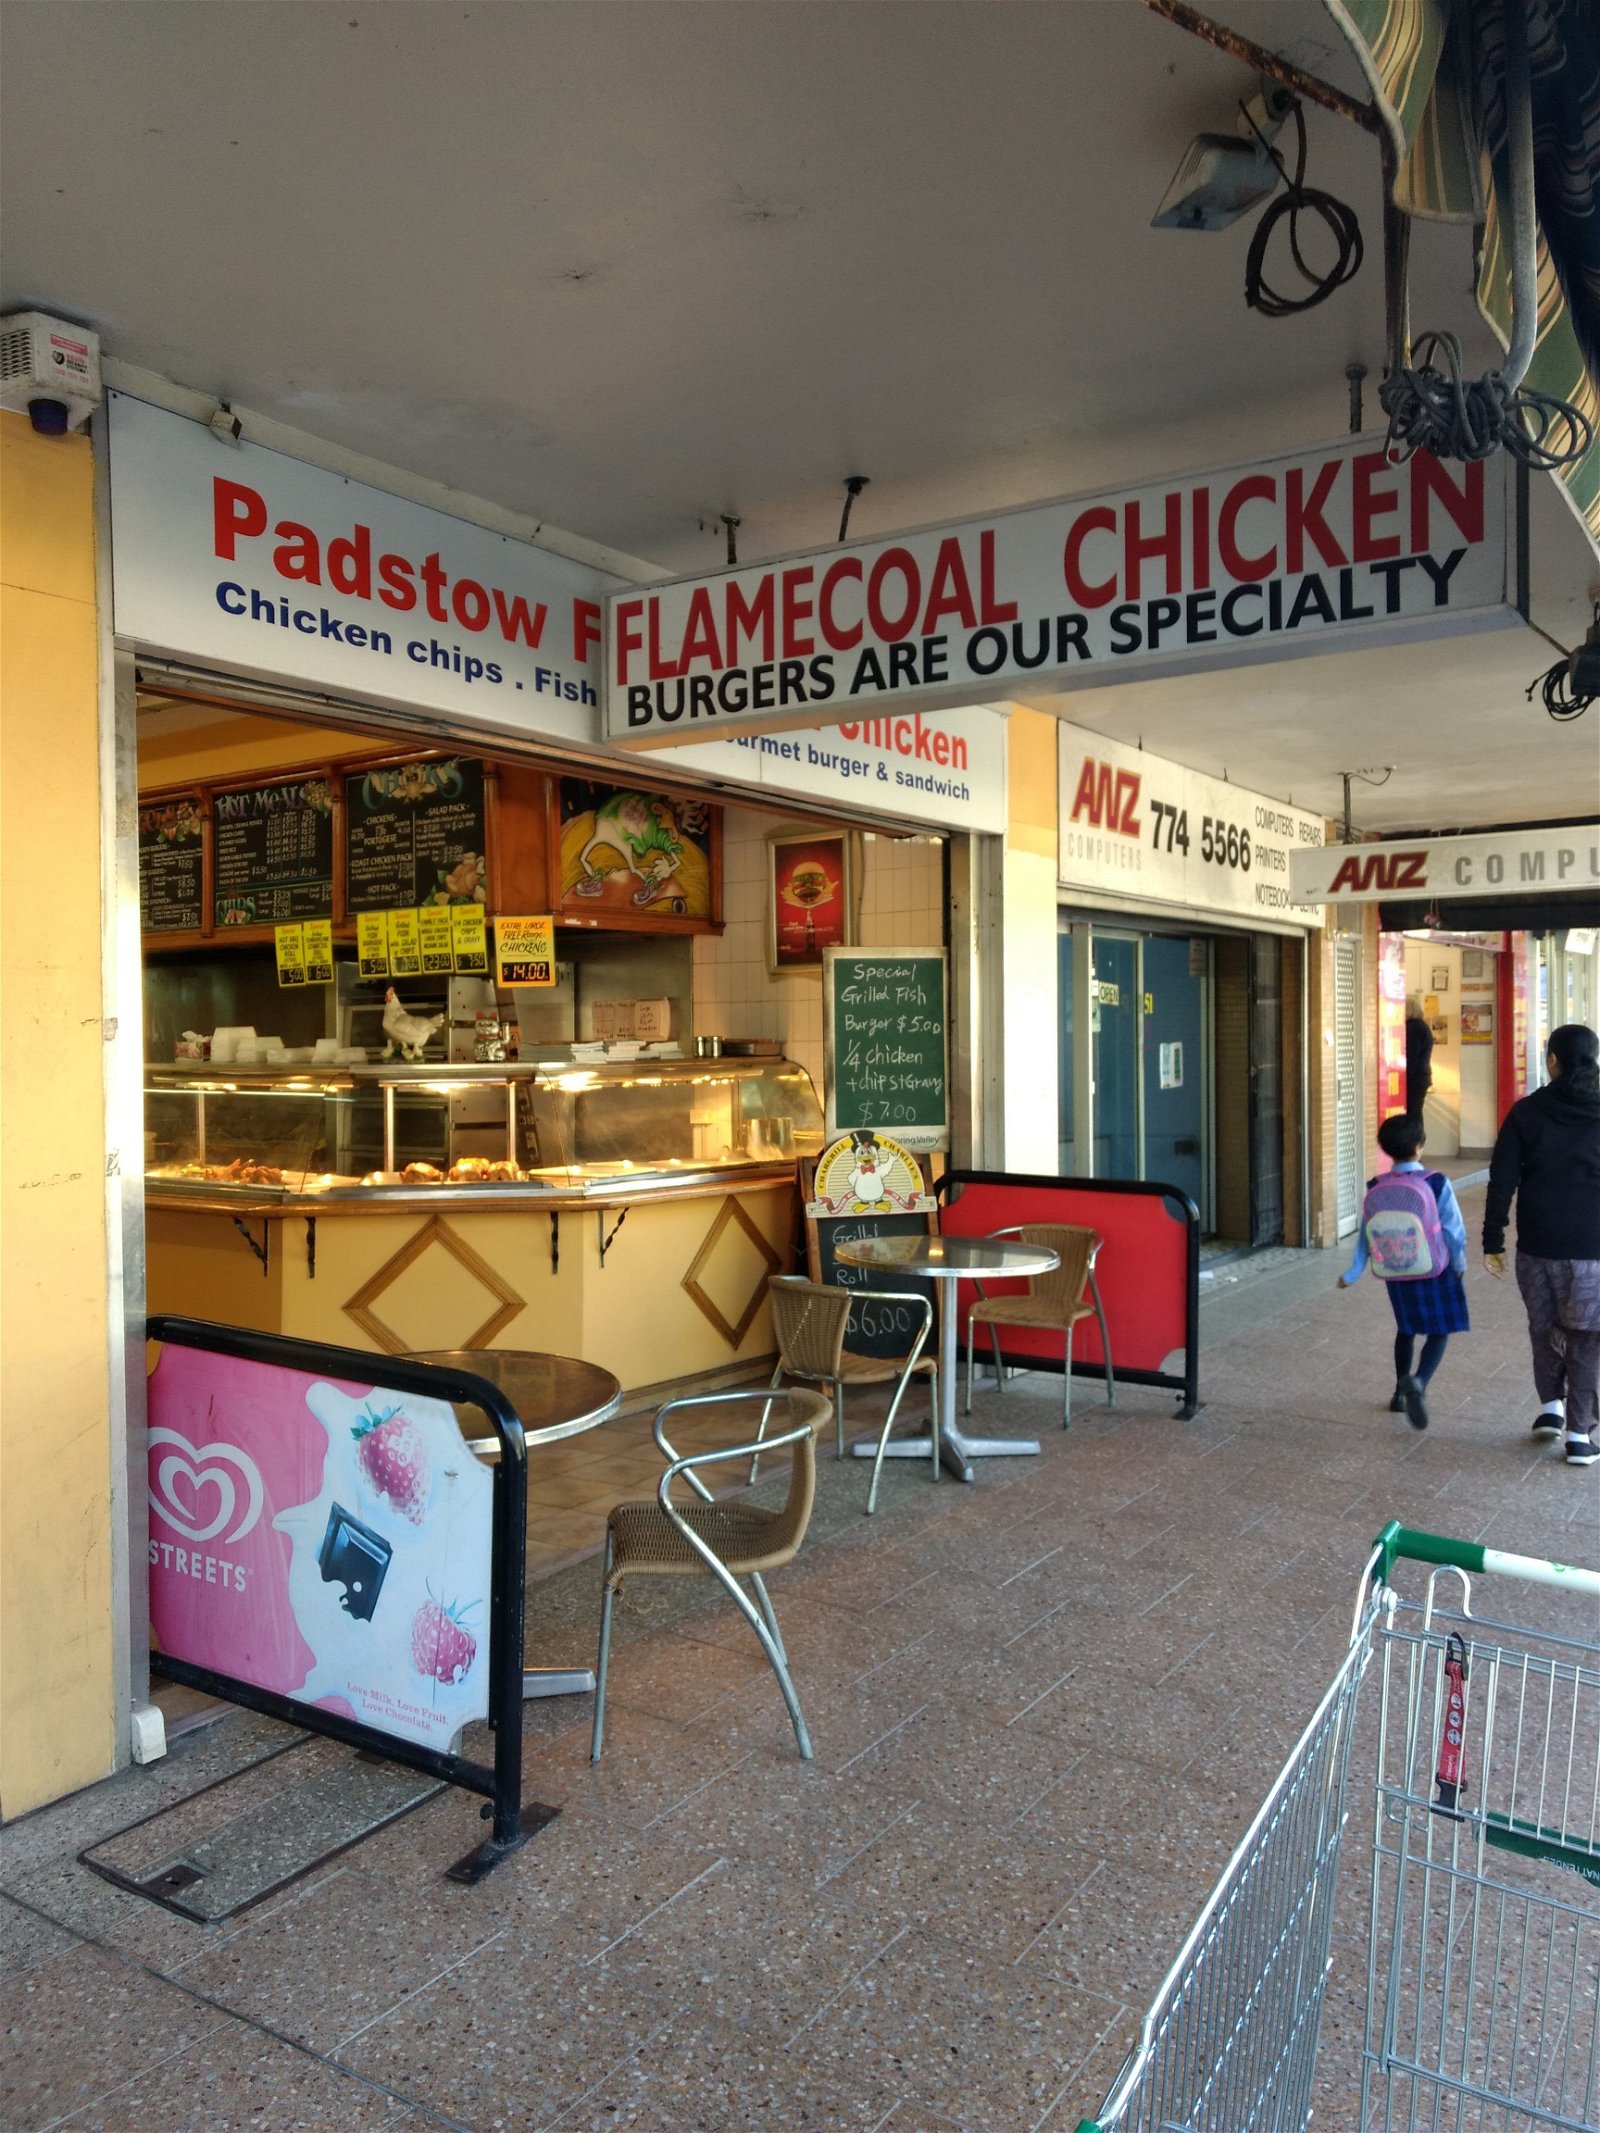 Padstow Flamecoal Chicken